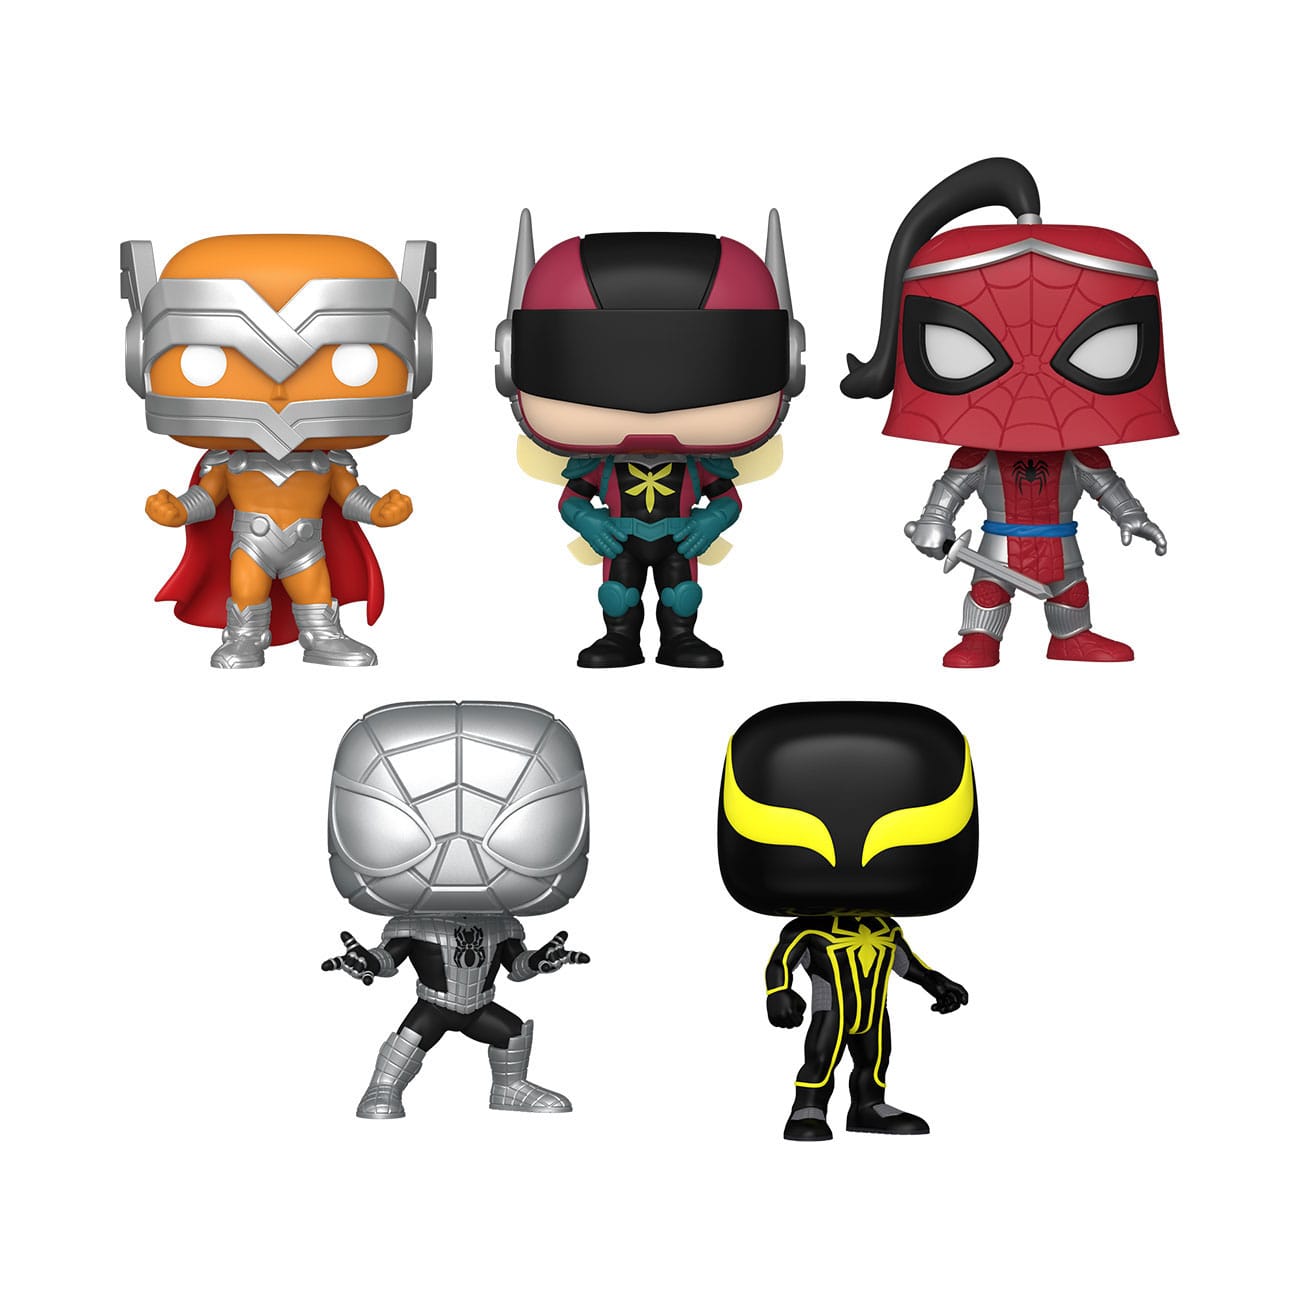 Marvel POP! Vinyl Figure 5-Pack Year of the Spider Special Edition 9cm